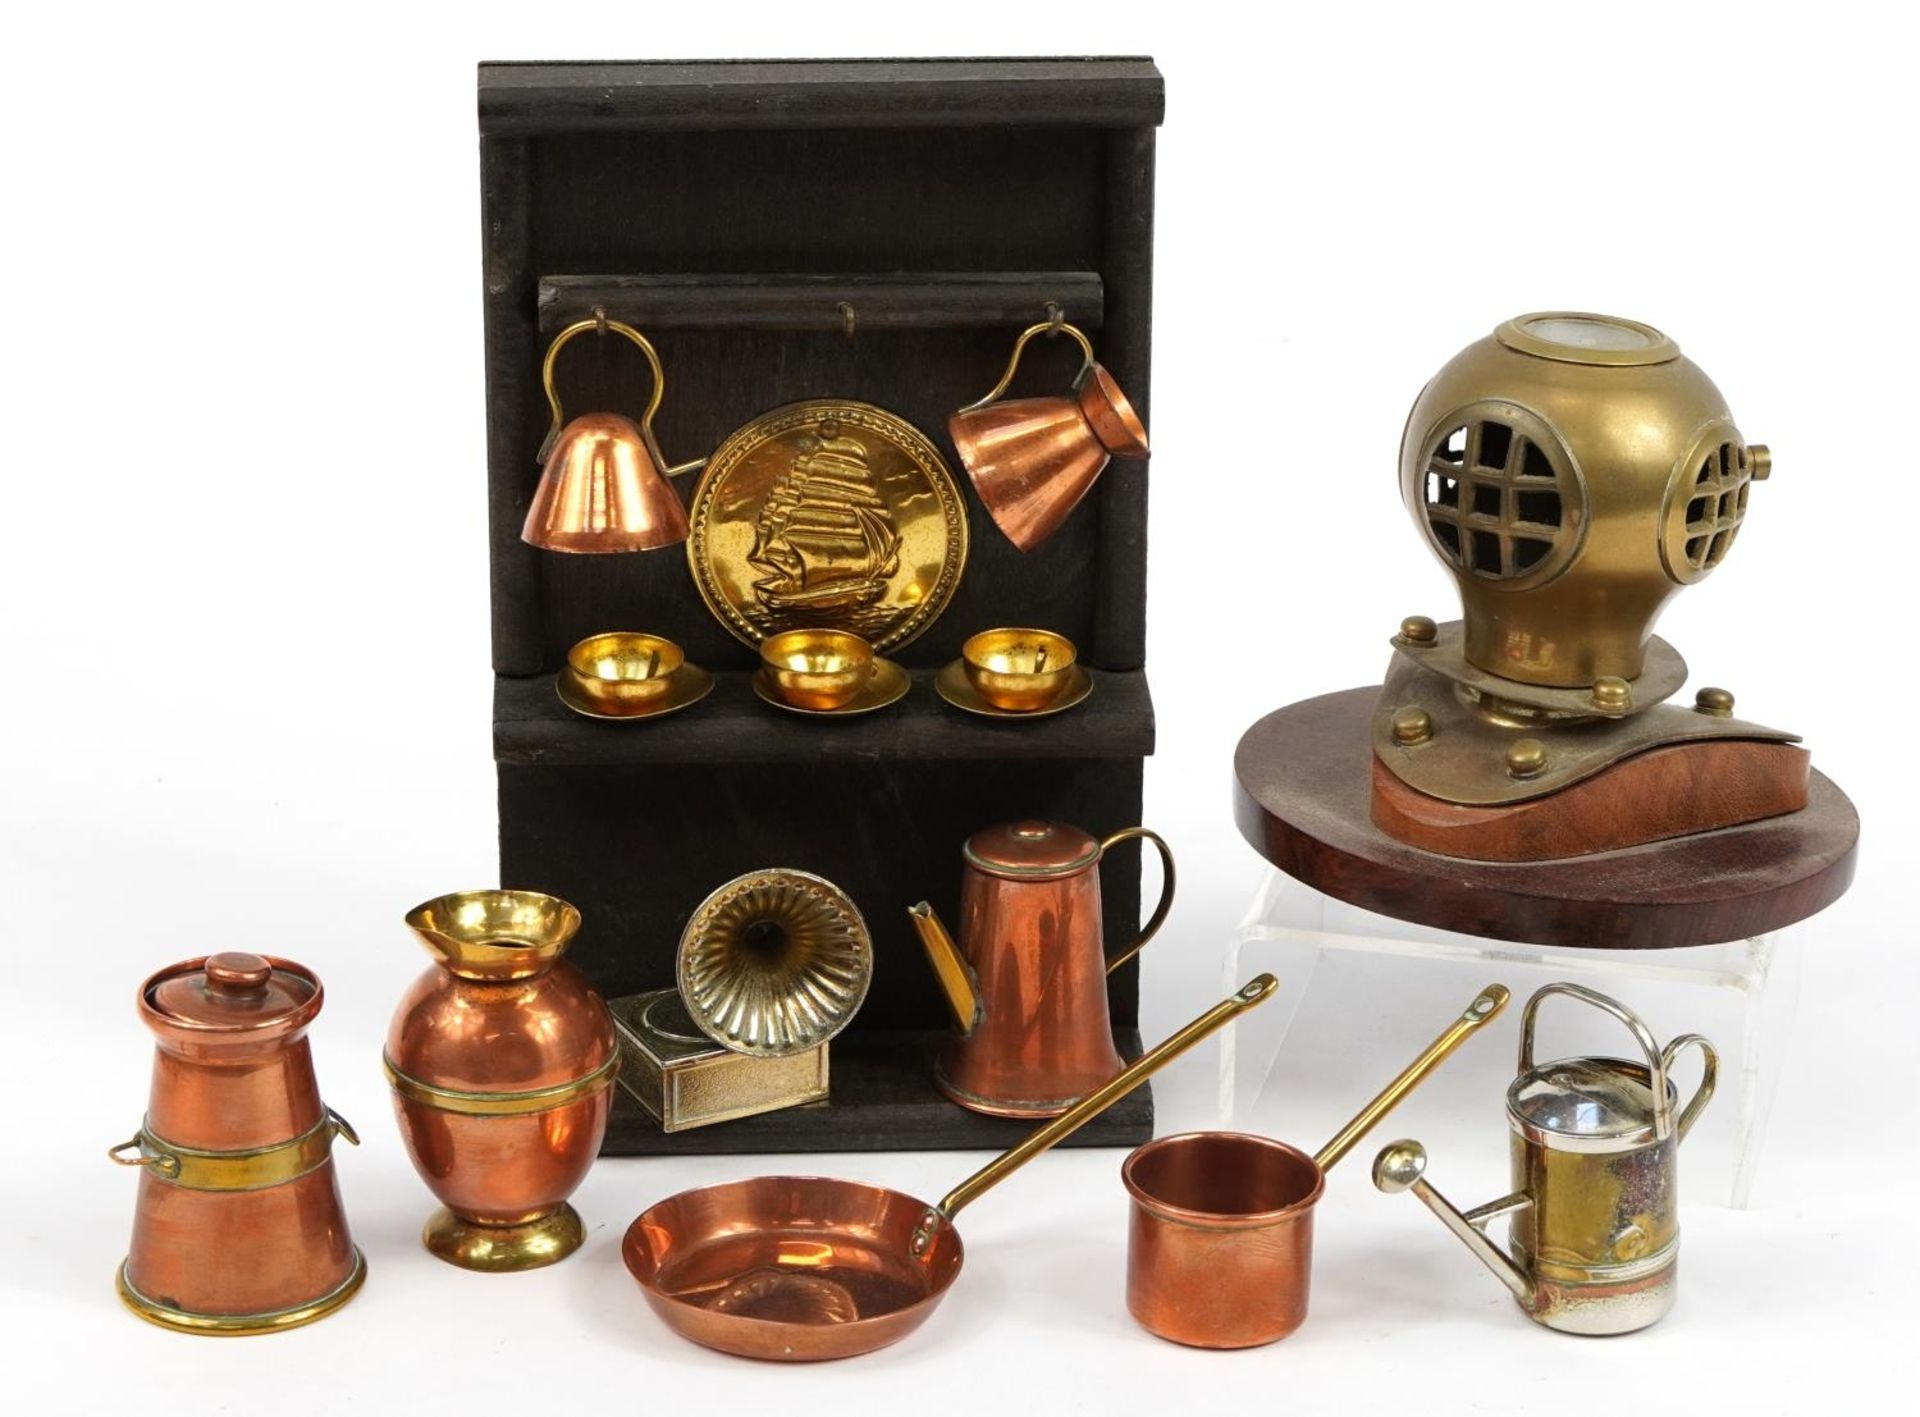 Objects including miniature copper and brass doll's house accessories and a brass diver's helmet